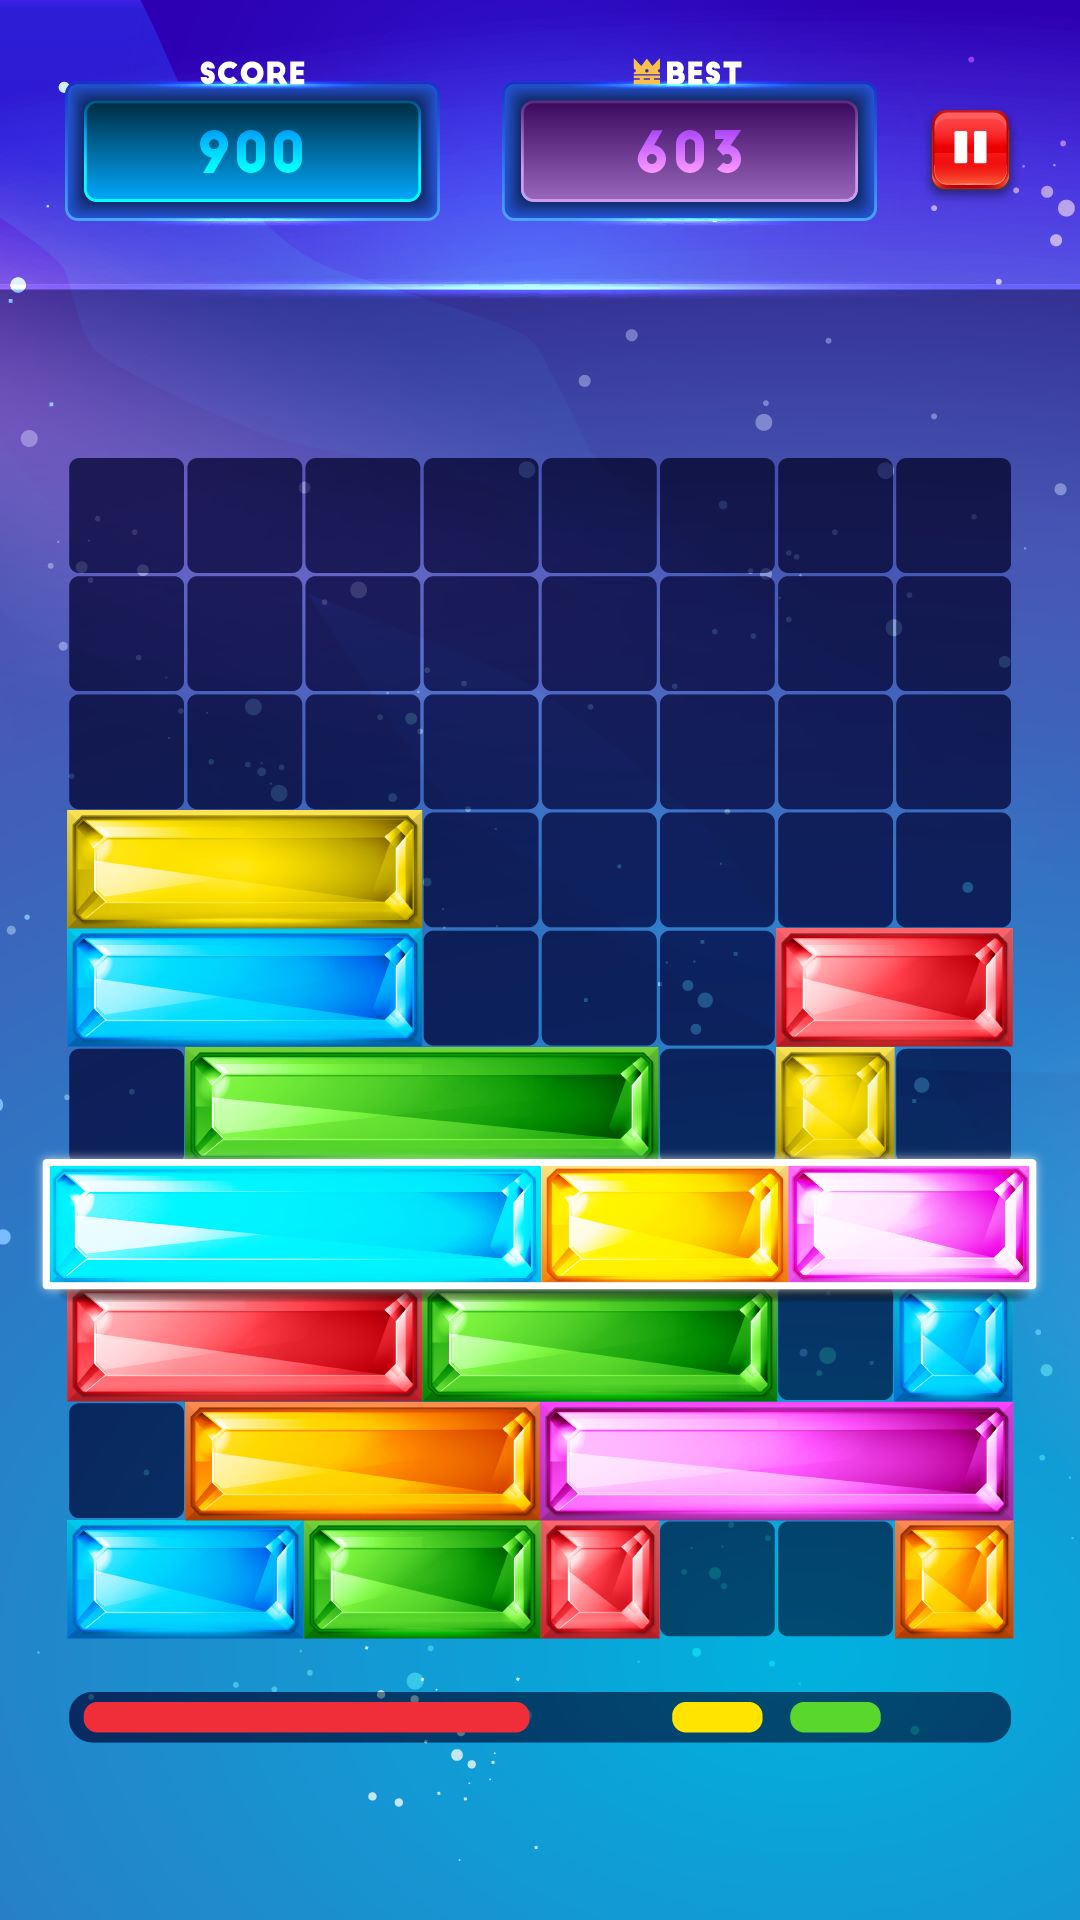 Blocks: Block Puzzle Games Free for Kindle Fire